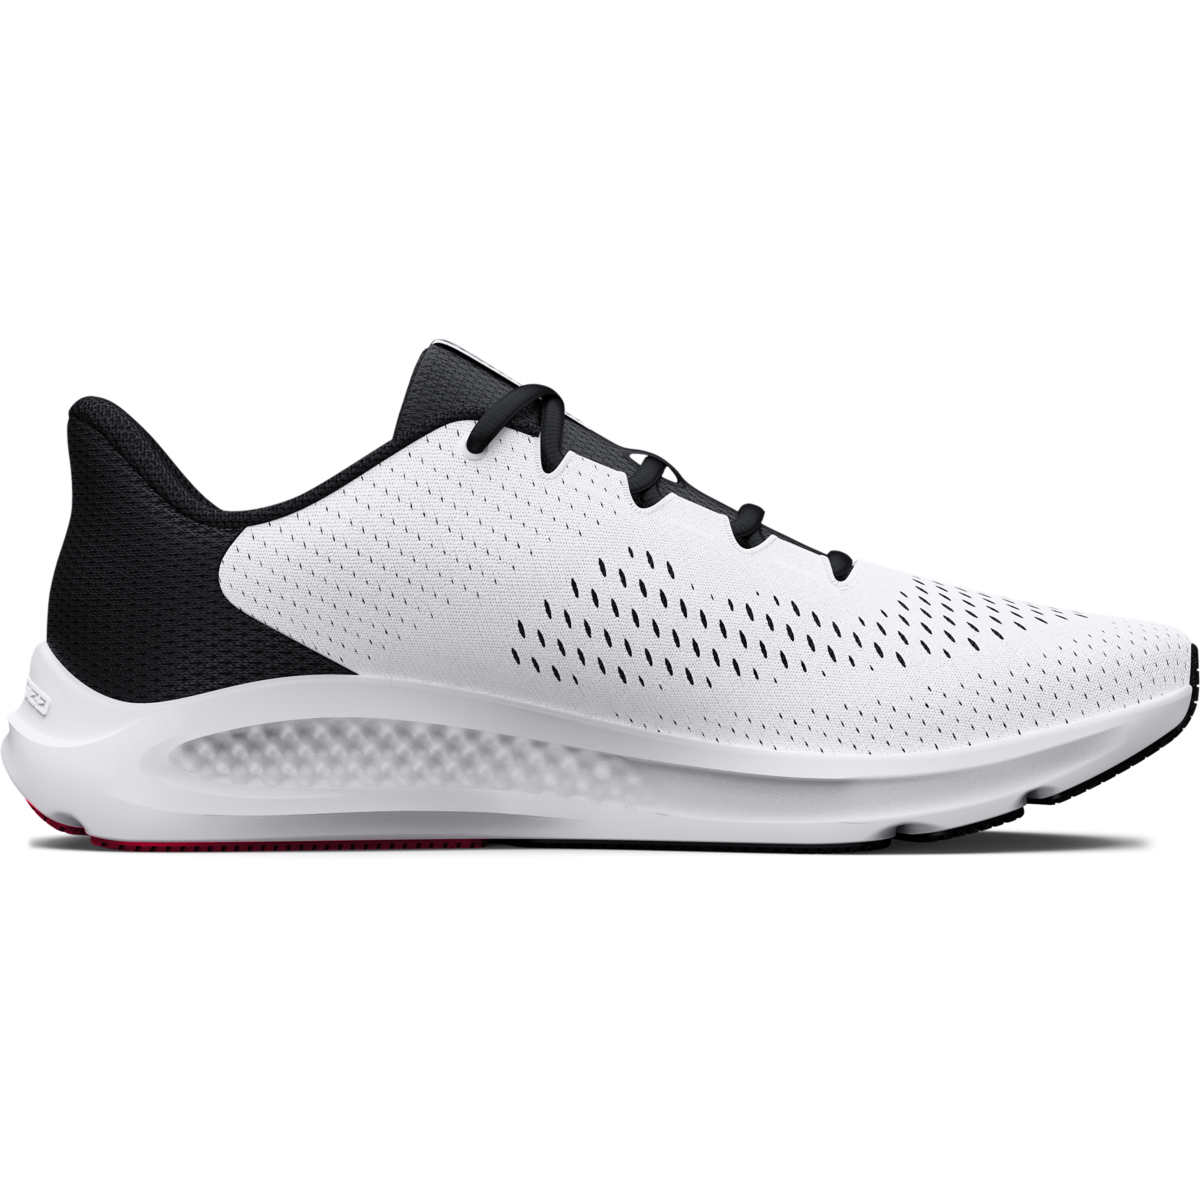 Under Armour Charged Pursuit 3 Big Logo Men's Running Shoes